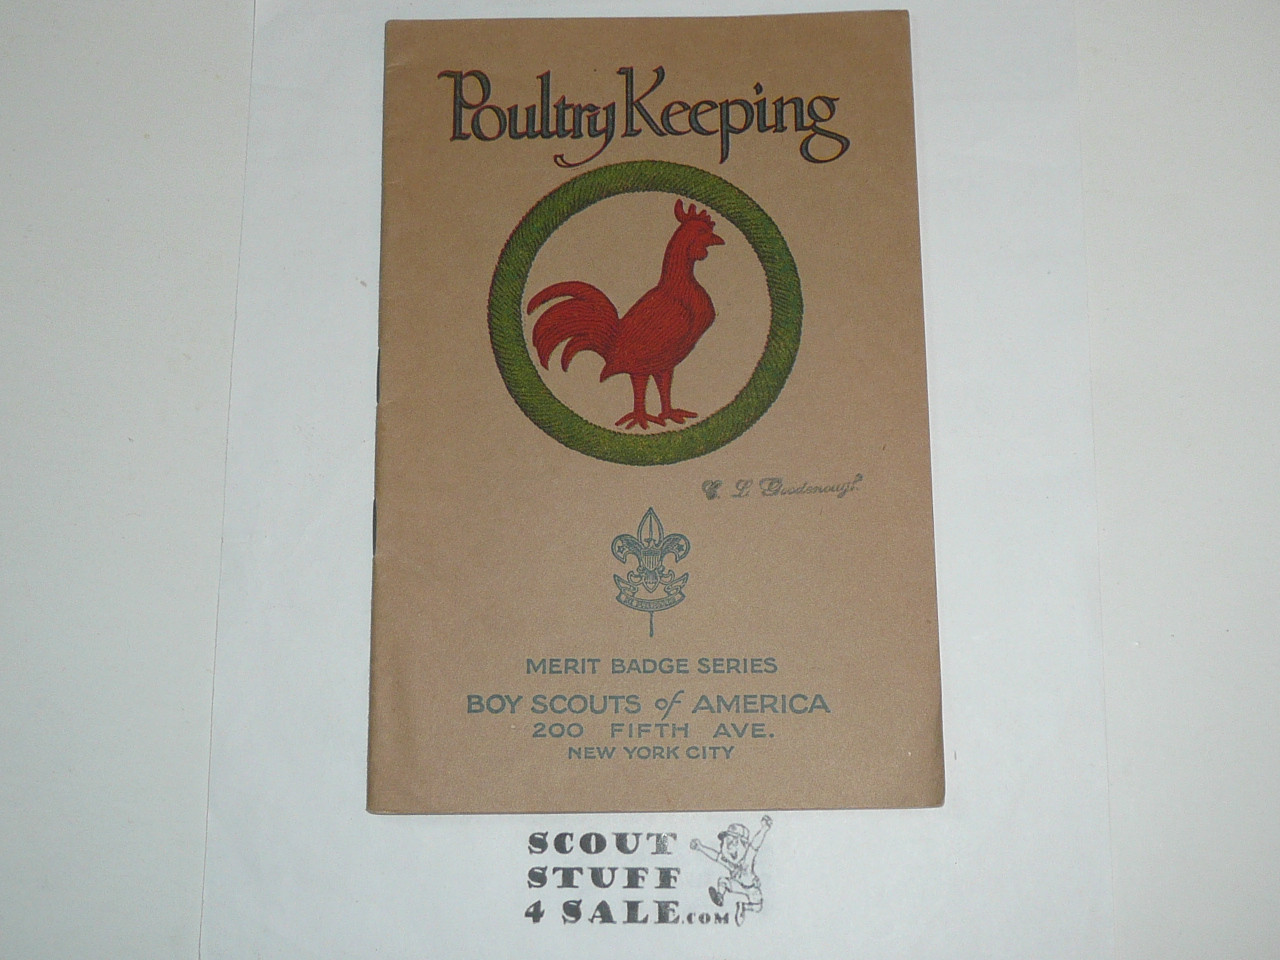 Poultry Keeping Merit Badge Pamphlet, Type 3, Tan Cover, 1925 Printing, Mint Condition